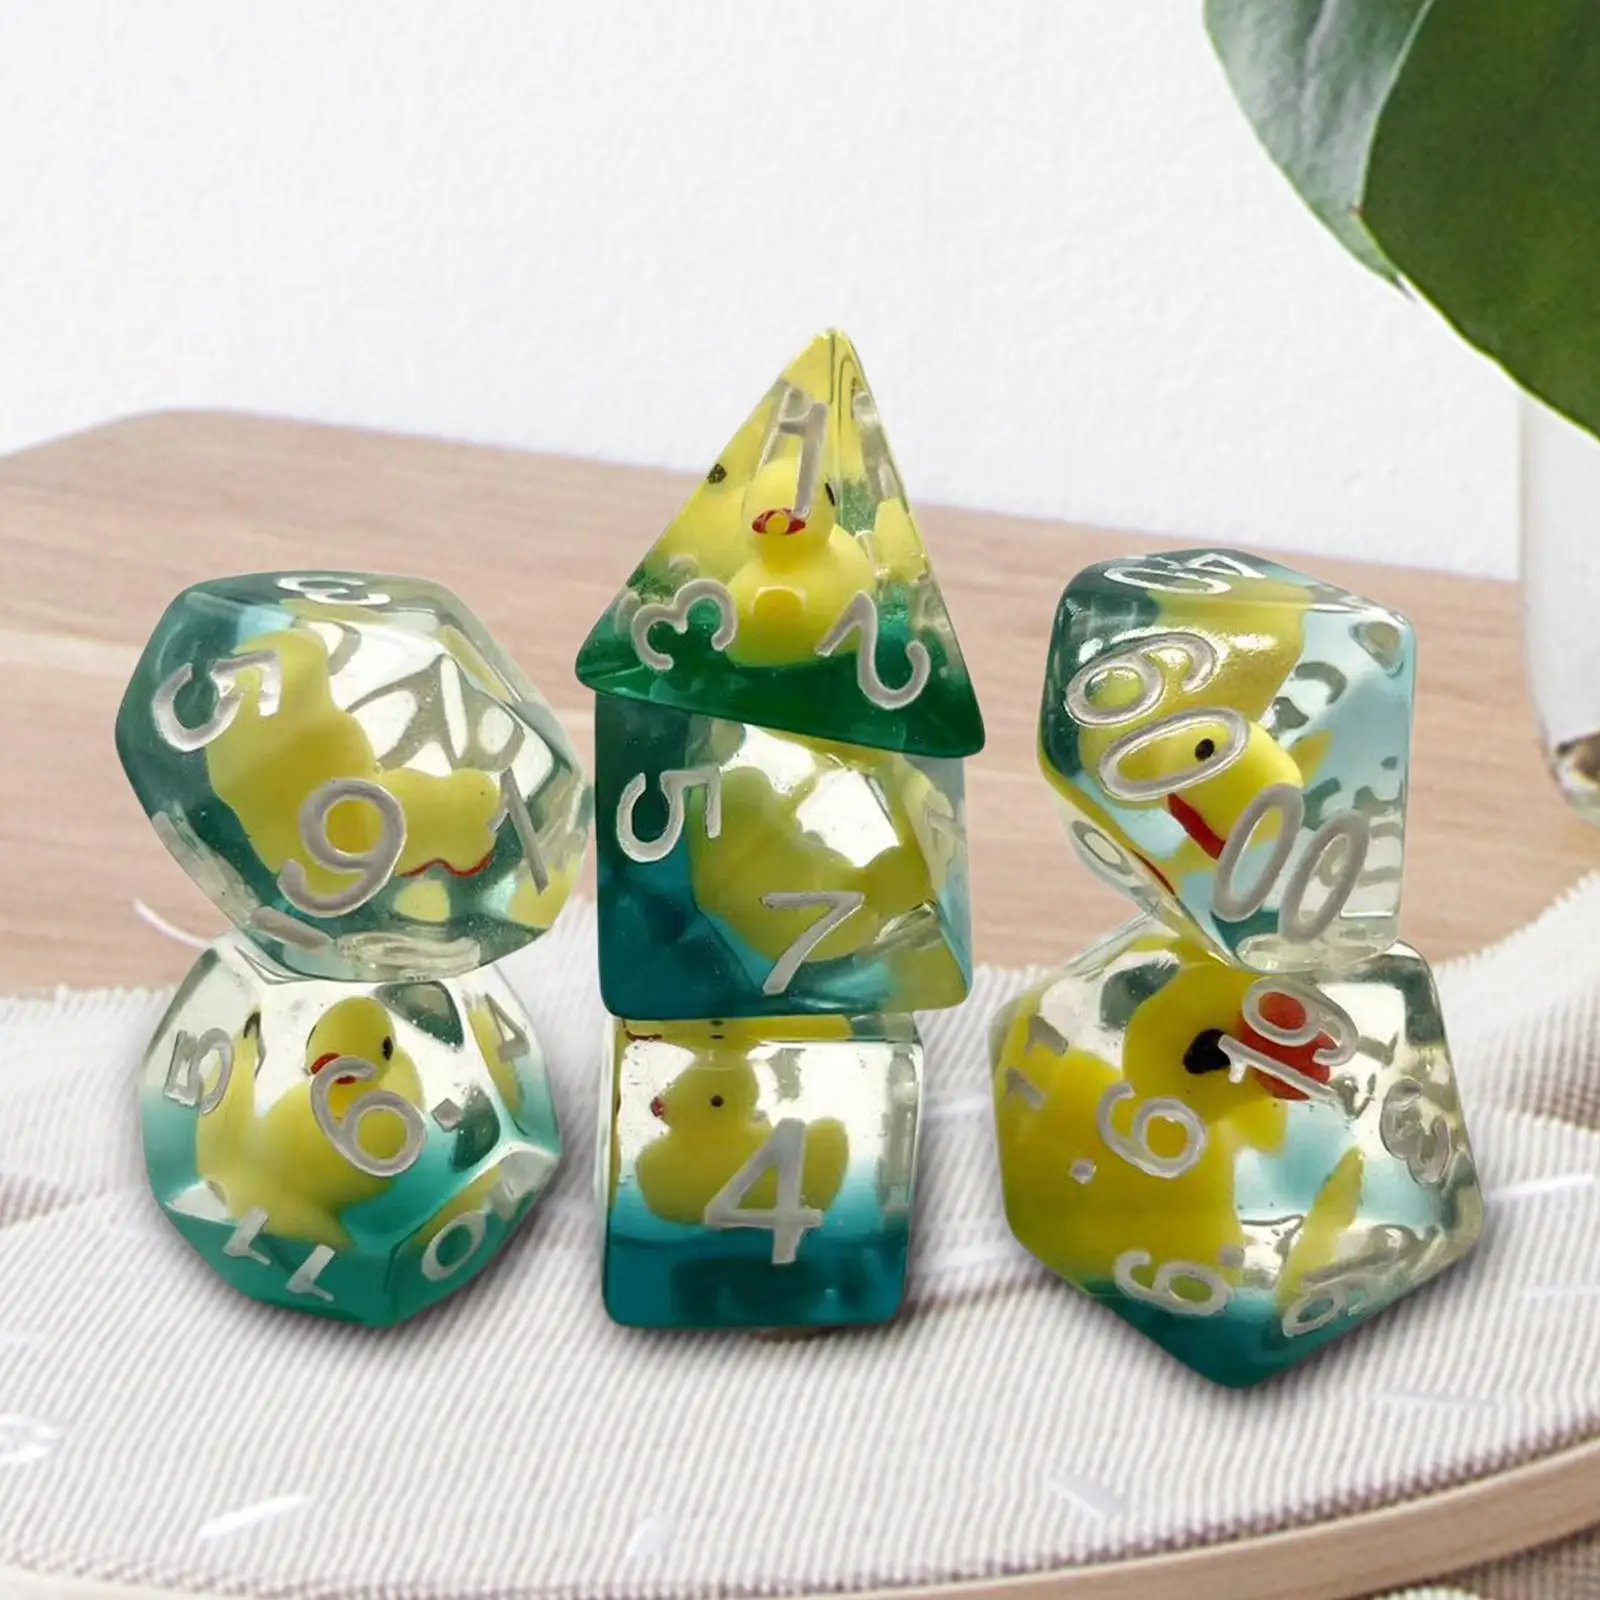 7 Pieces Acrylic Polyhedral Dices Set Bar Toys Filled with Ducks D4-D20 for MTG Role Playing RPG Card Games Table Games